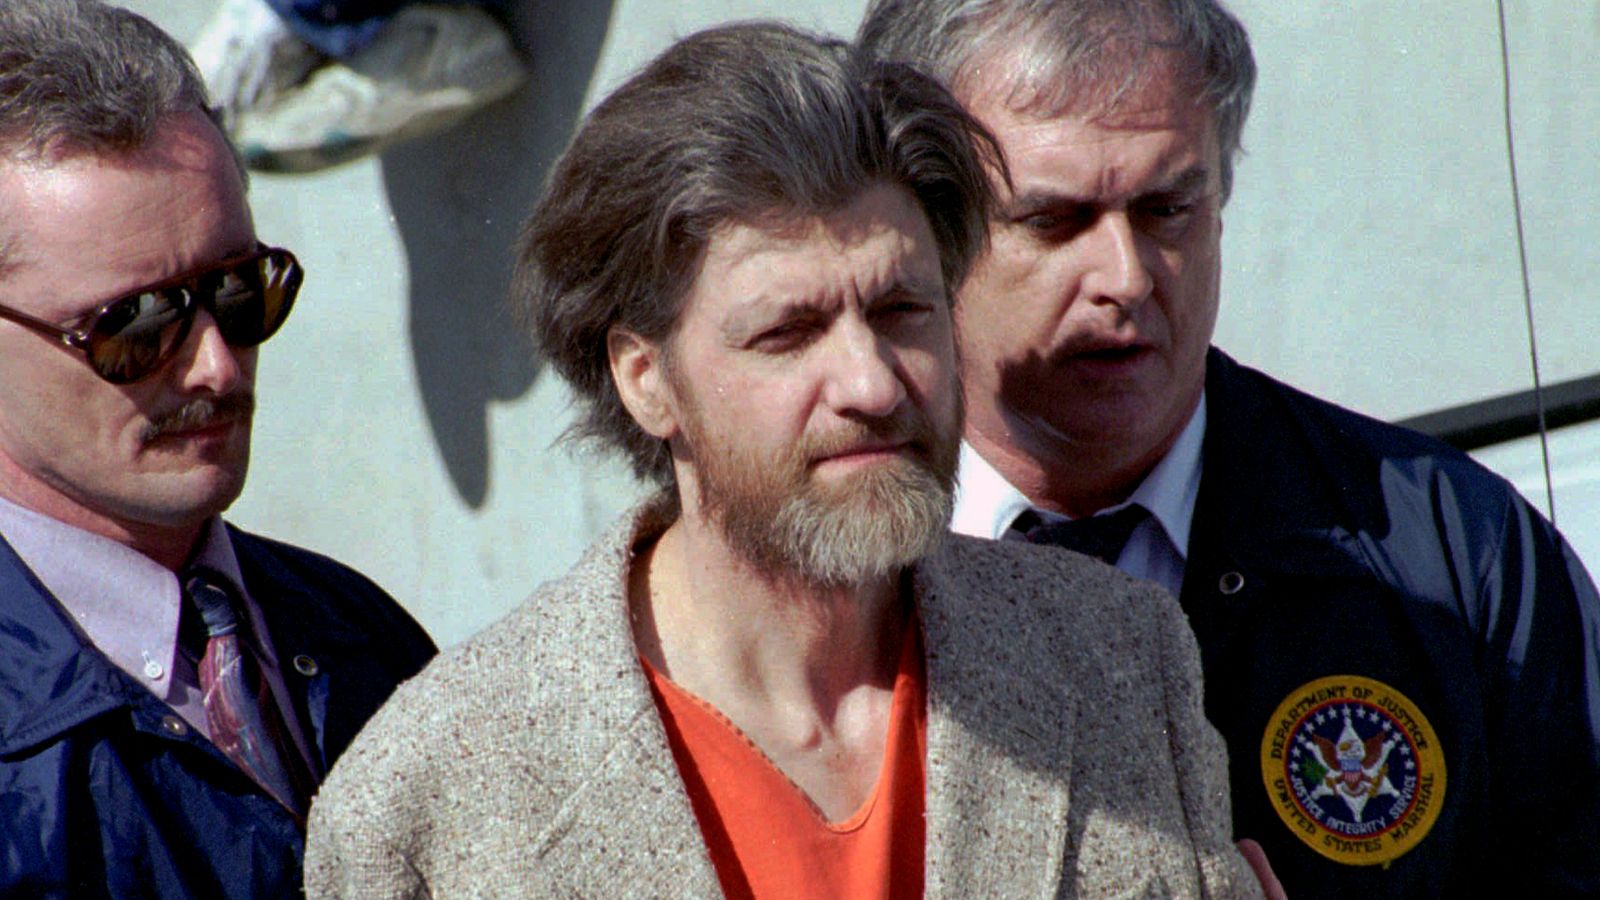 Ted Kaczynski: Unabomber died by suicide in US prison medical centre, AP sources say